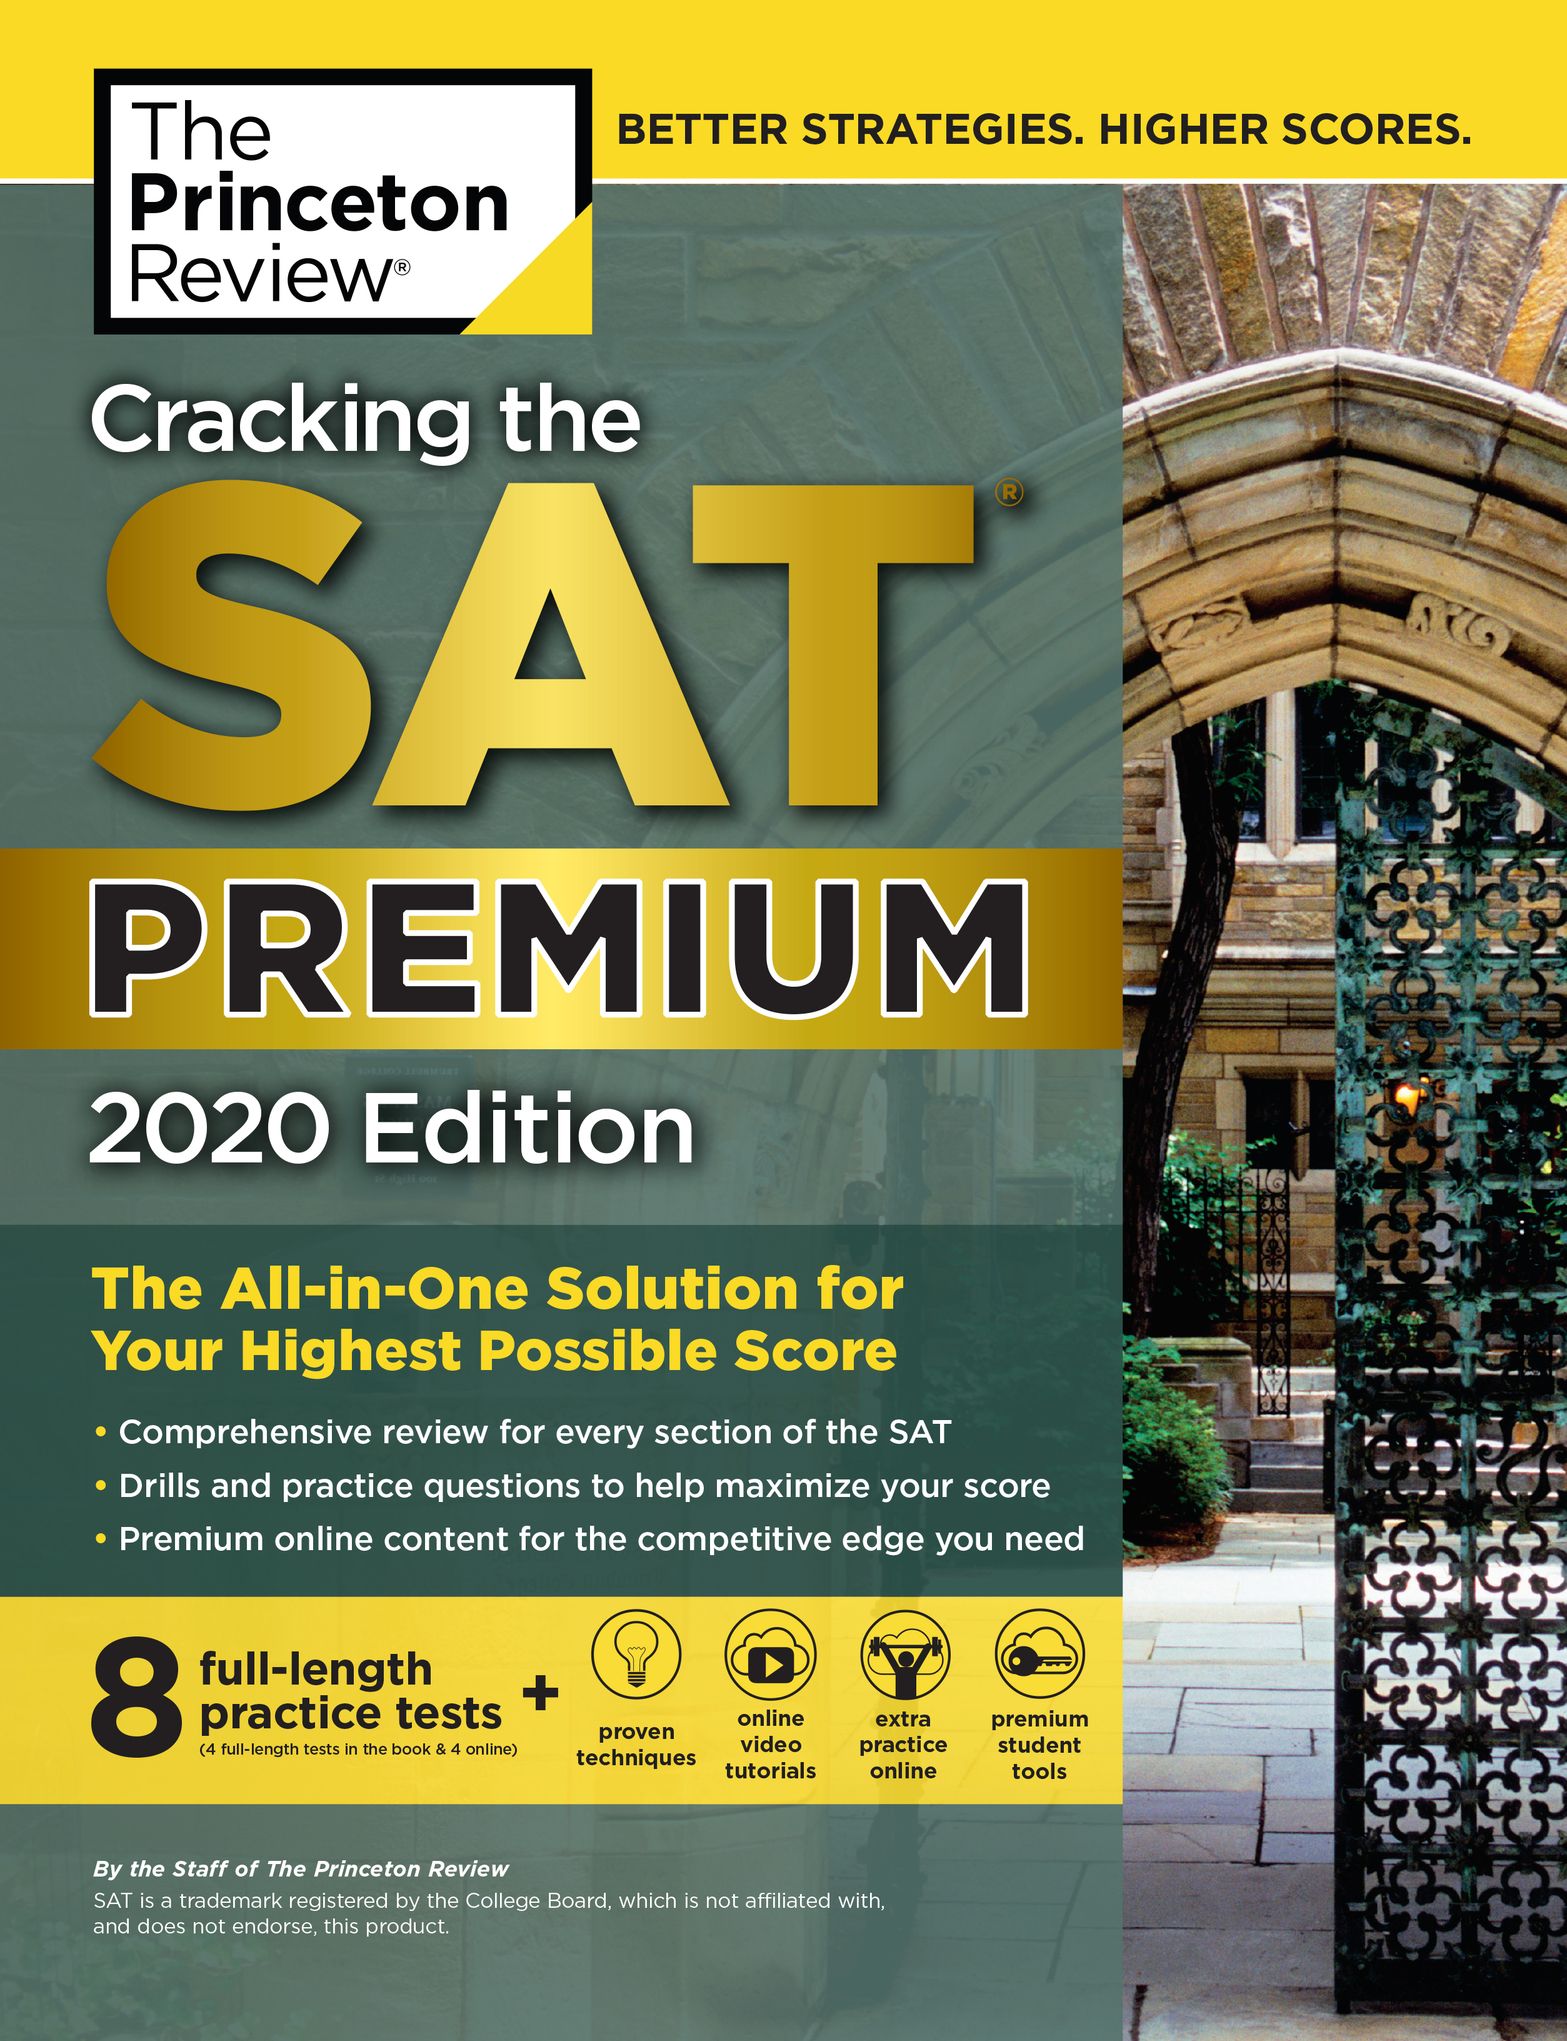 cracking-the-sat-premium-edition-with-8-practice-tests-2020-the-all-in-one-solution-for-your